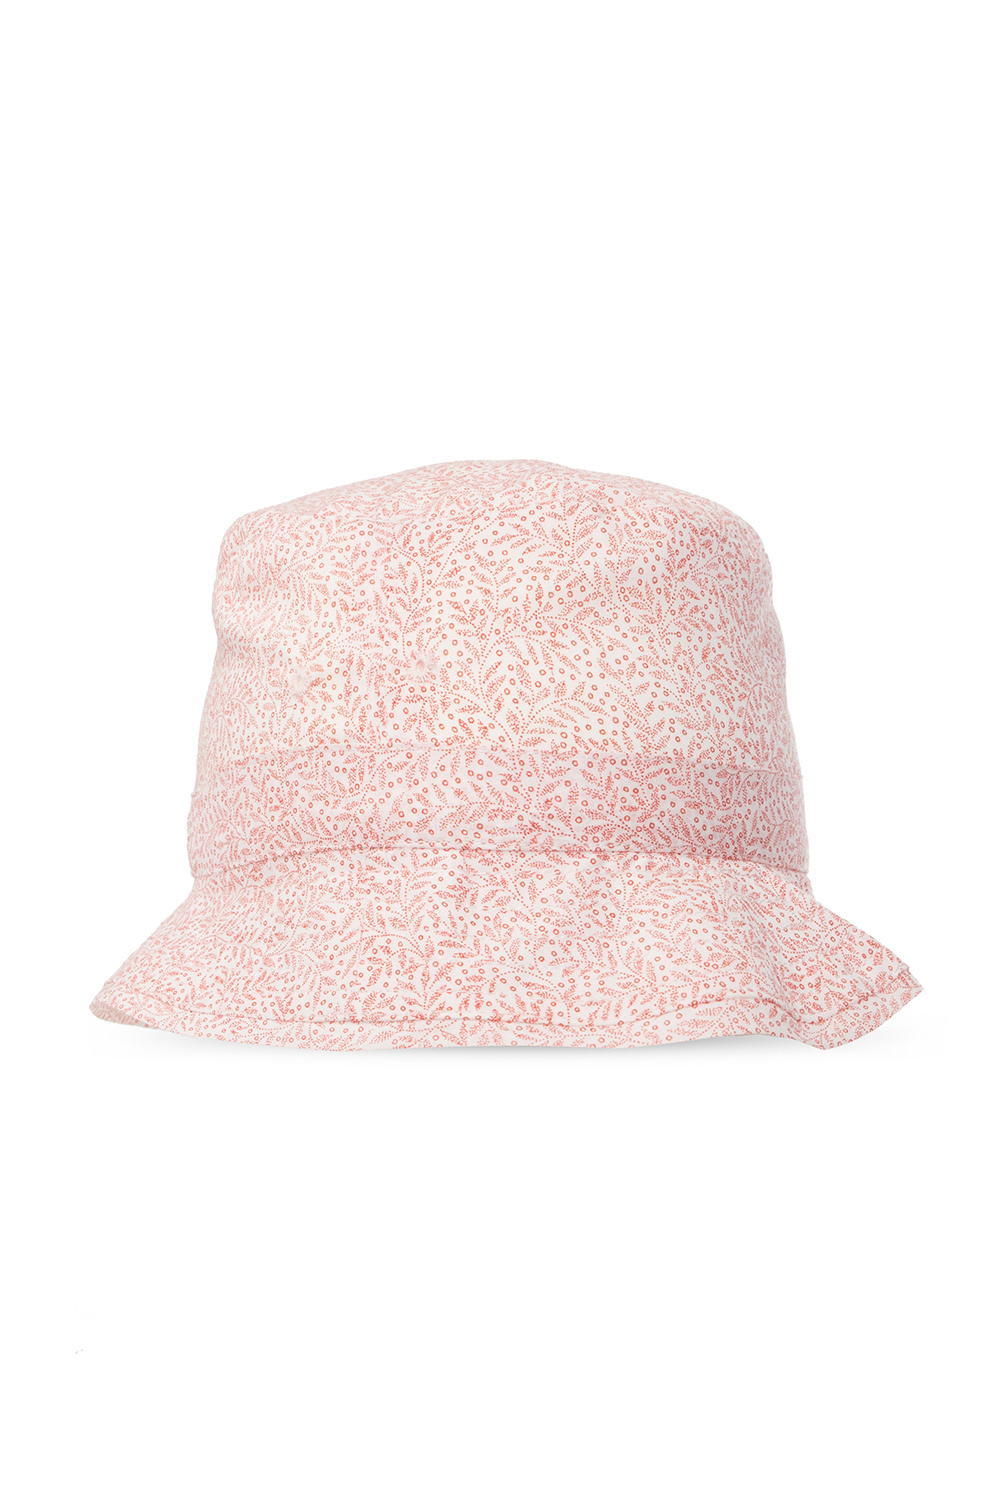 Bonpoint  Bucket hat Run with floral motif